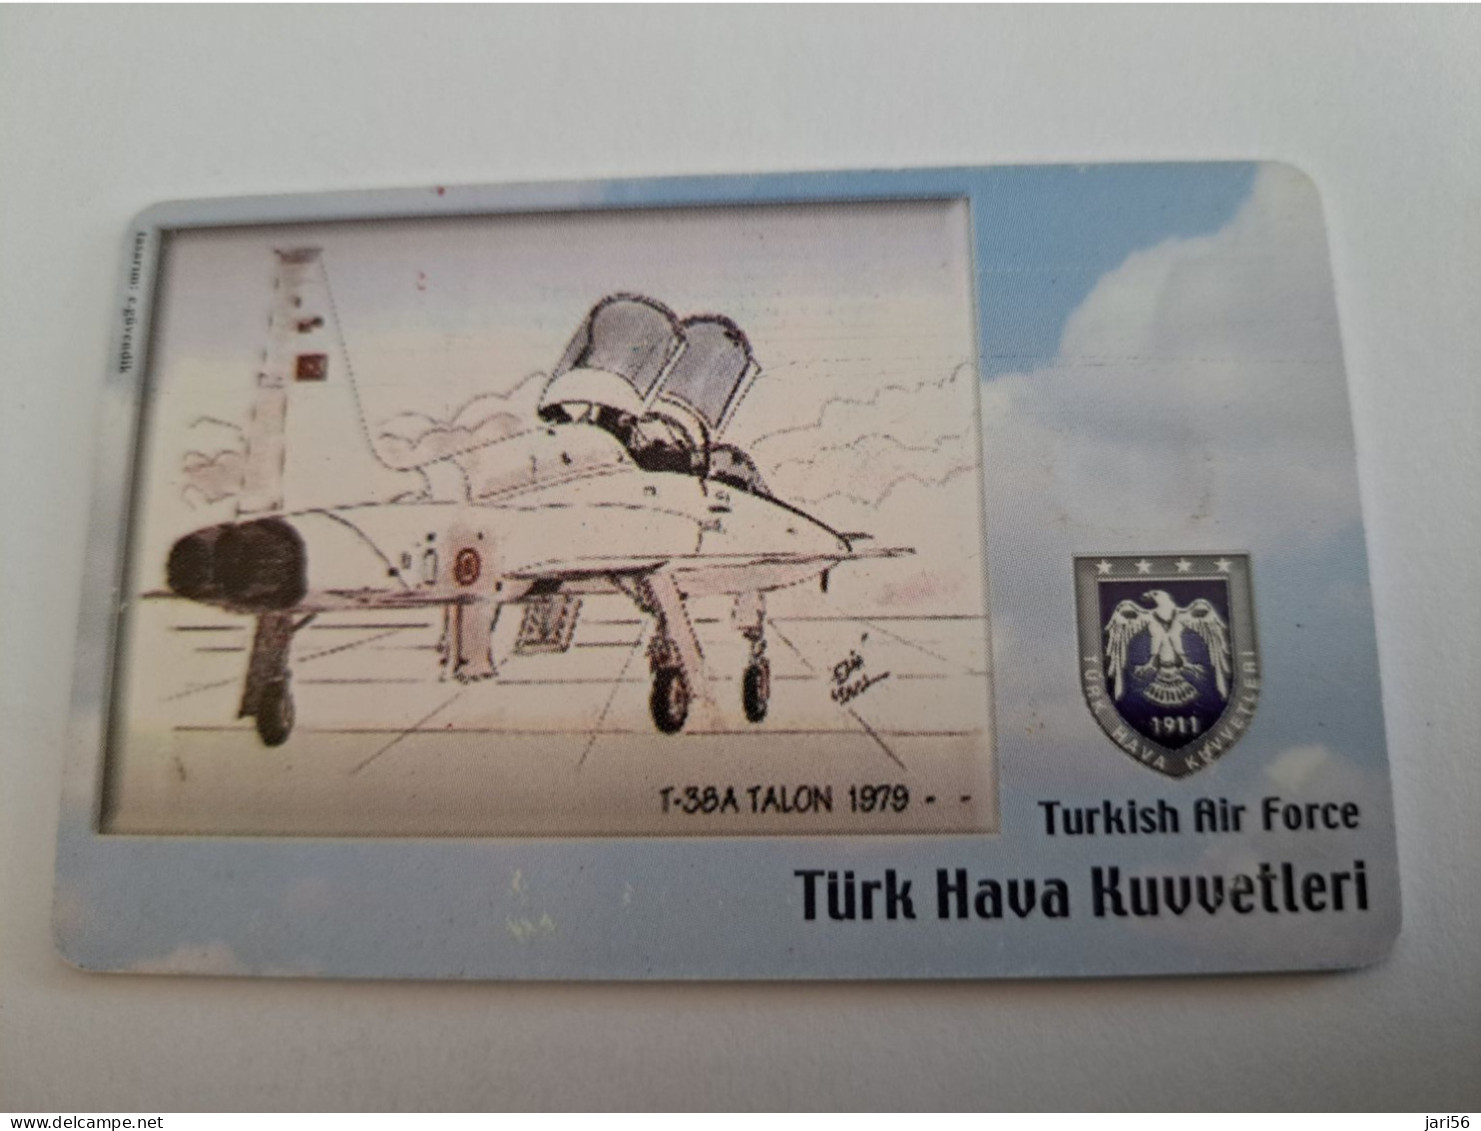 TURKIJE / 50 UNITS/ CHIPCARD/ TURKISH AIR FORCE  / DIFFERENT PLANES /        Fine Used Card  **15444** - Turquie